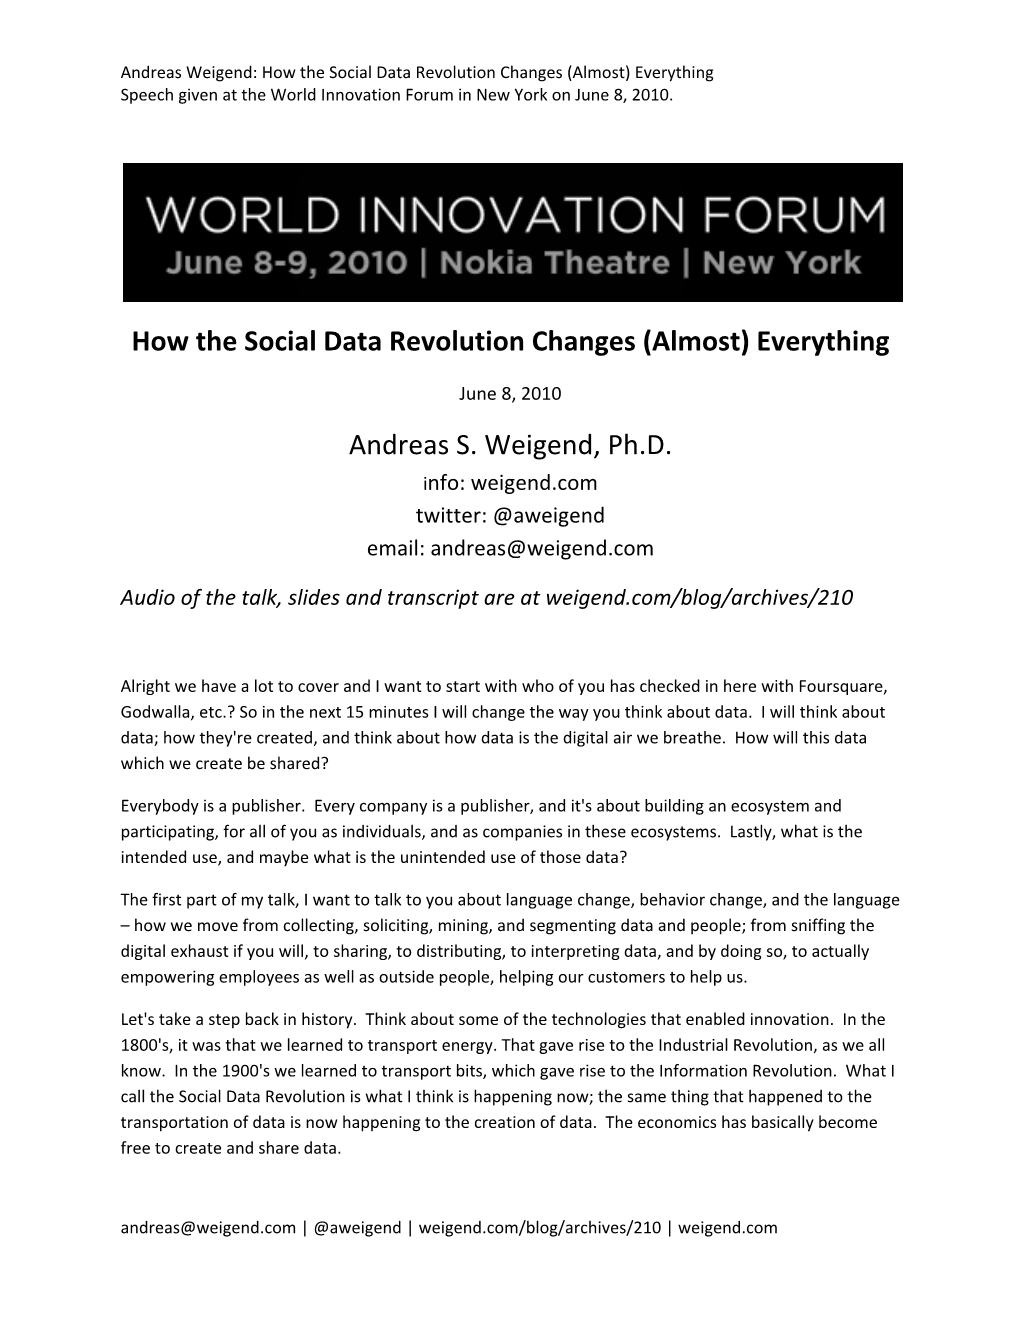 How the Social Data Revolution Changes (Almost) Everything Speech Given at the World Innovation Forum in New York on June 8, 2010